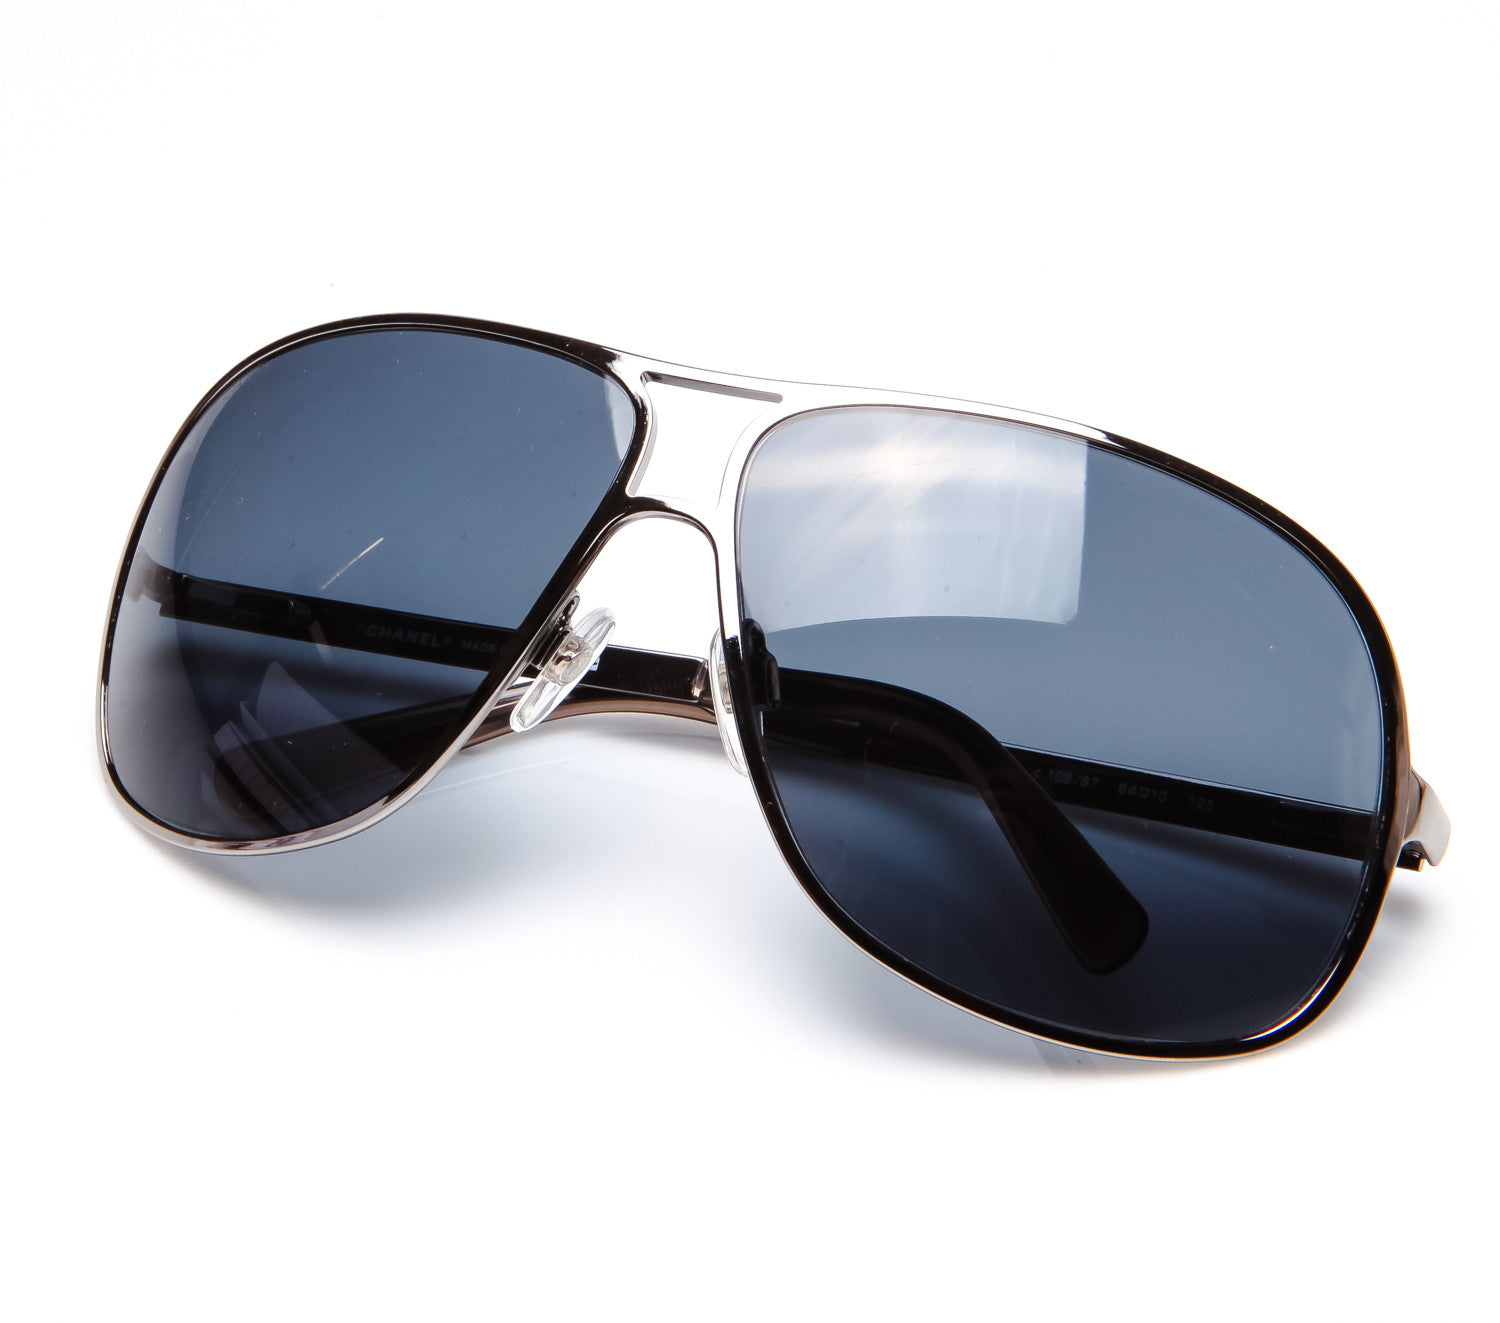 Authentic Chanel Sunglasses Model no. 5352 at 1stDibs